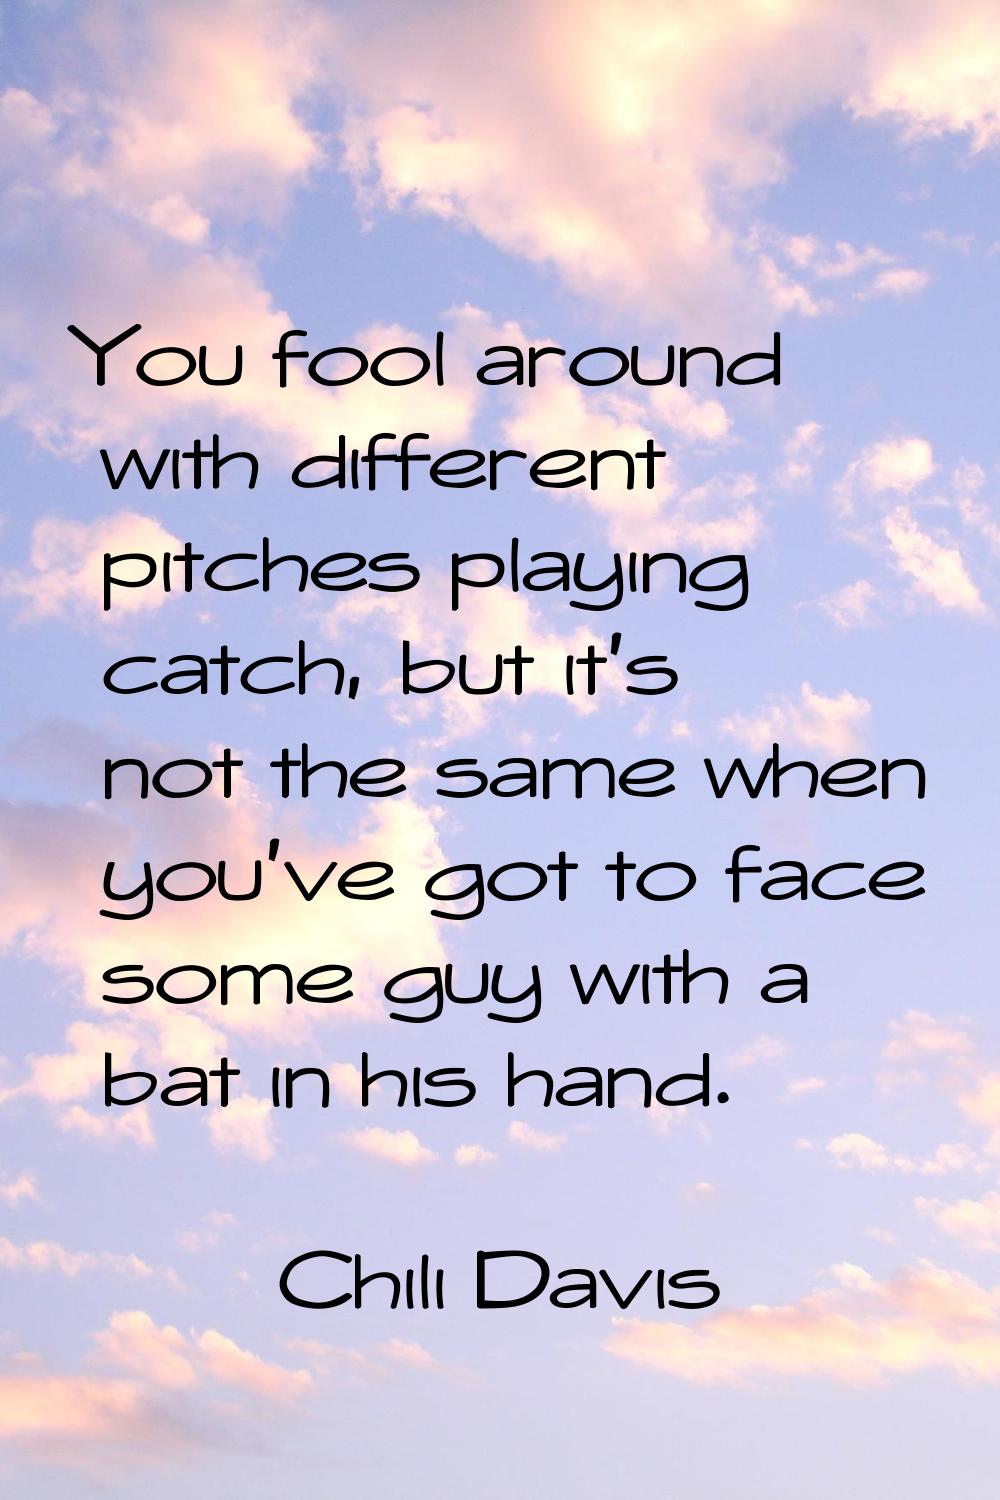 You fool around with different pitches playing catch, but it's not the same when you've got to face